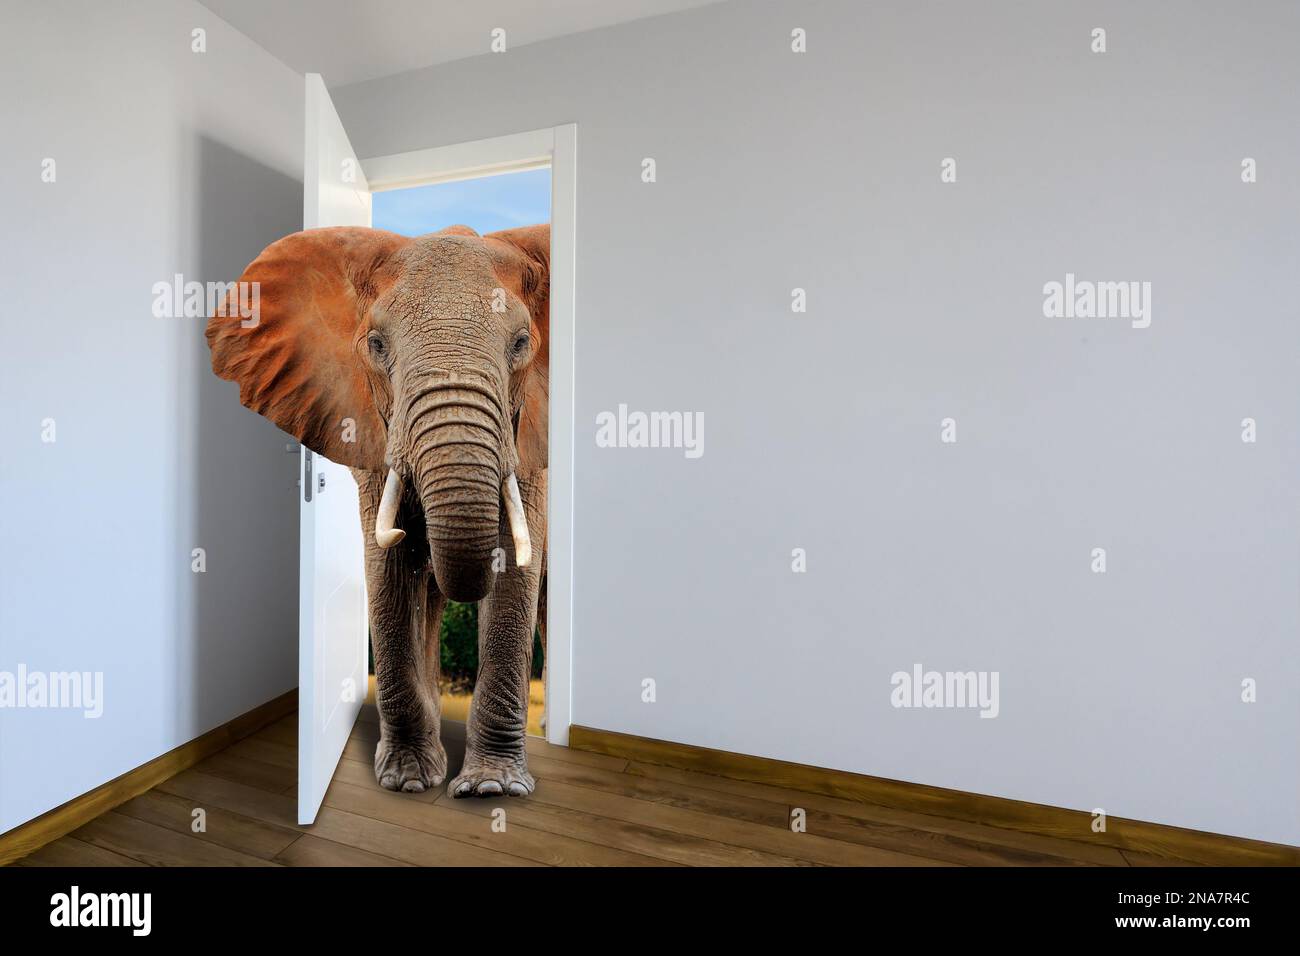 Elephants entering a door. Animal watching from a wall. Kids decoration room. Сhild's imagination or a dream Stock Photo